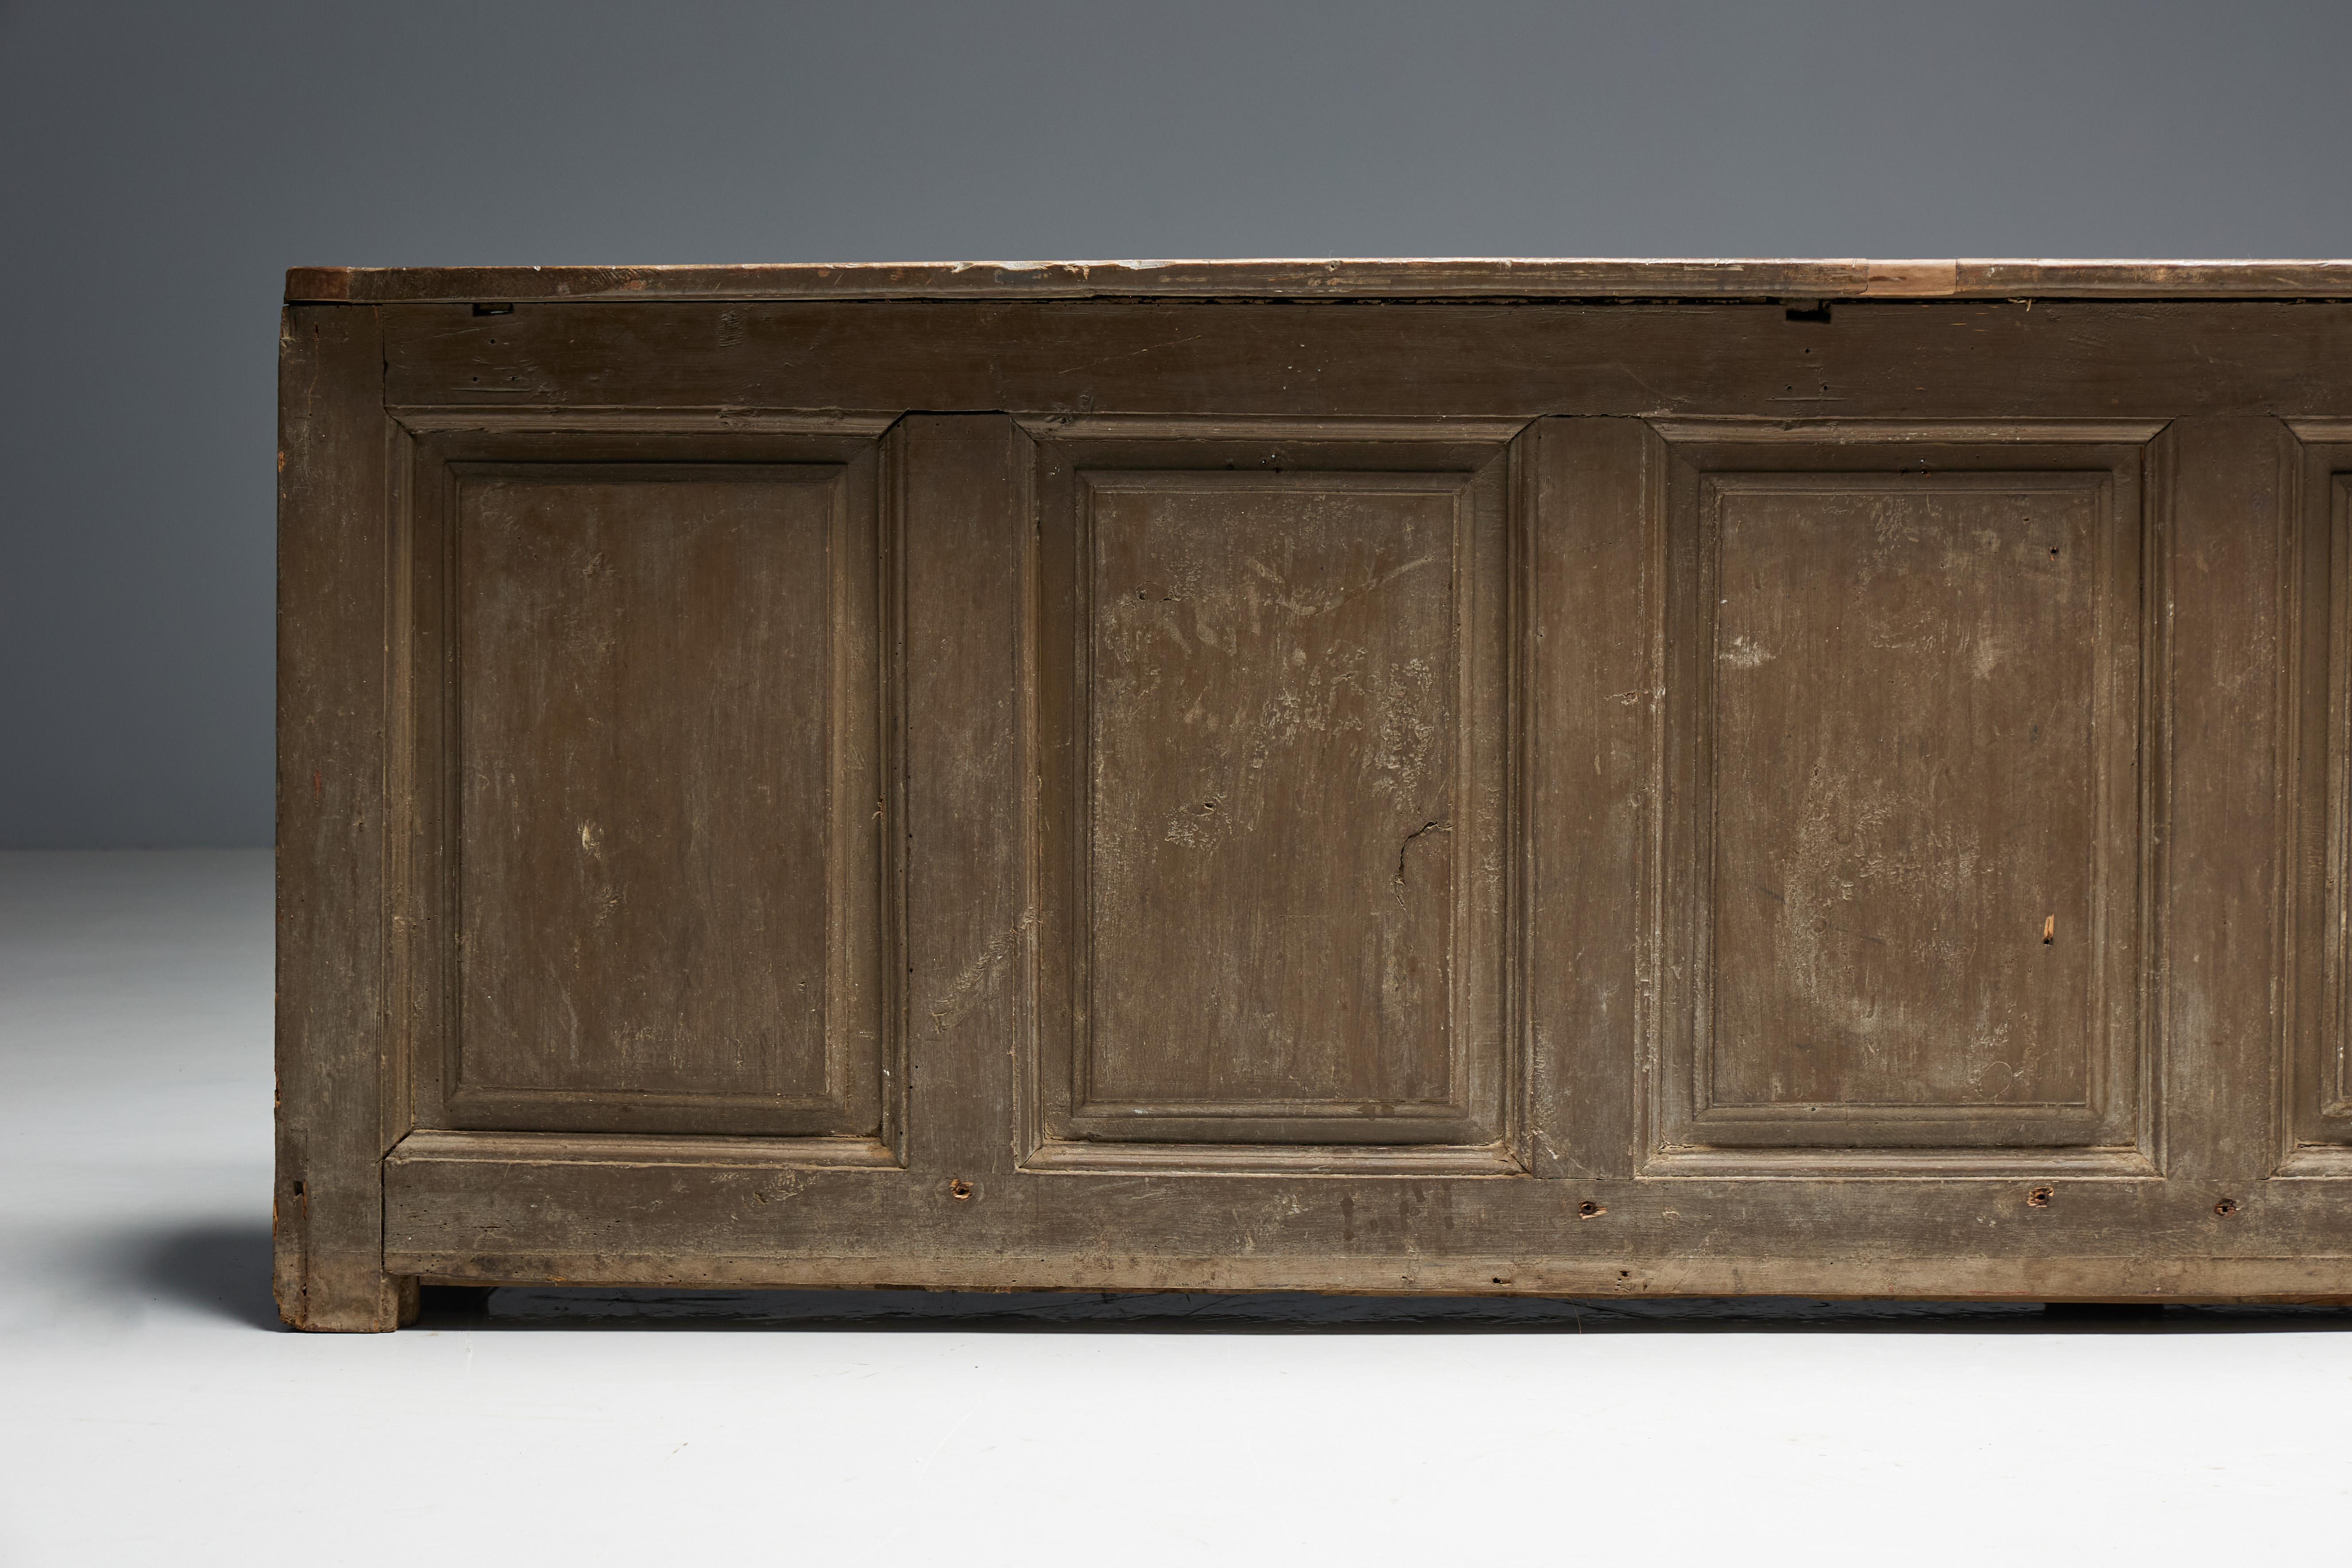 Rustic Art Populaire Freestanding Bar Counter, France, 19th Century For Sale 12